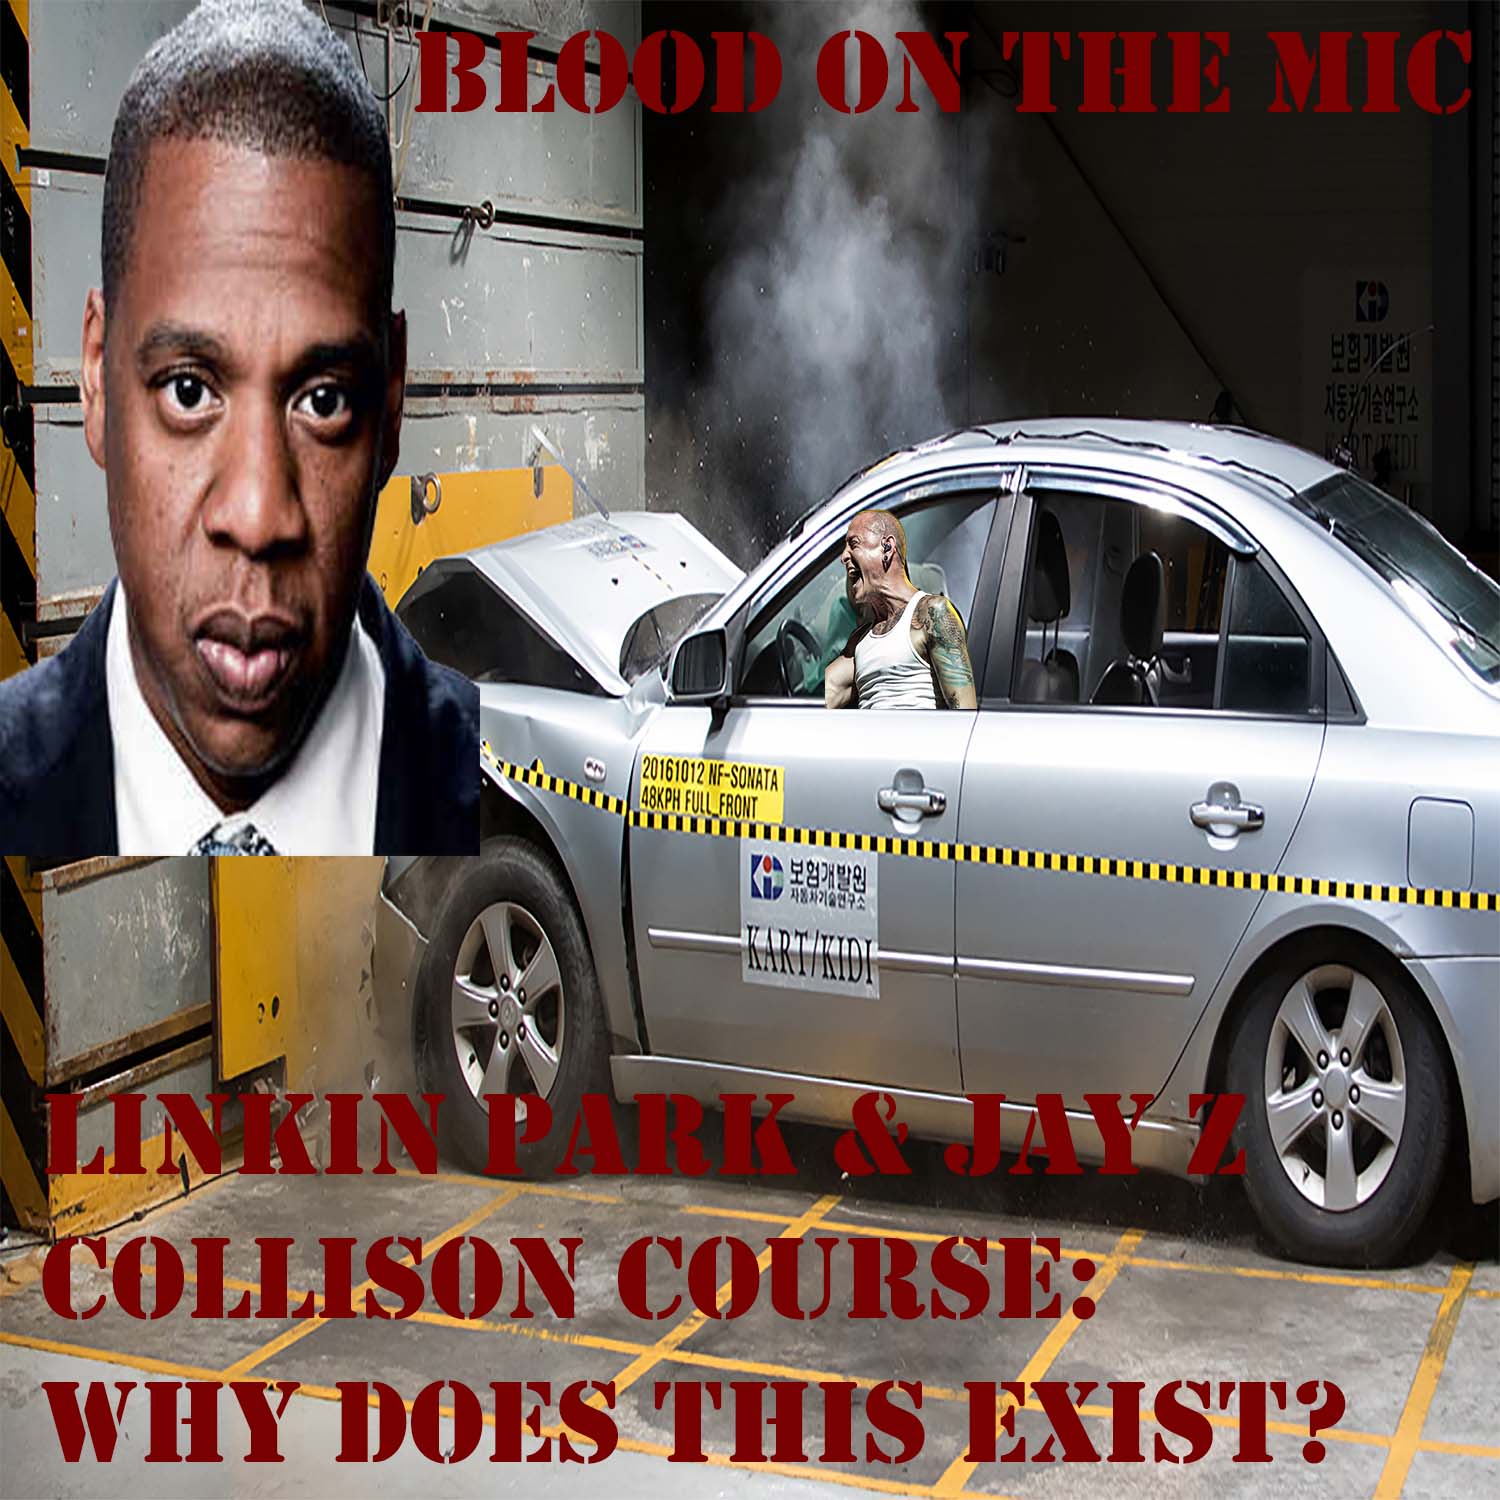 Linkin Park & Jay Z - Collision Course: Why Does This Exist?